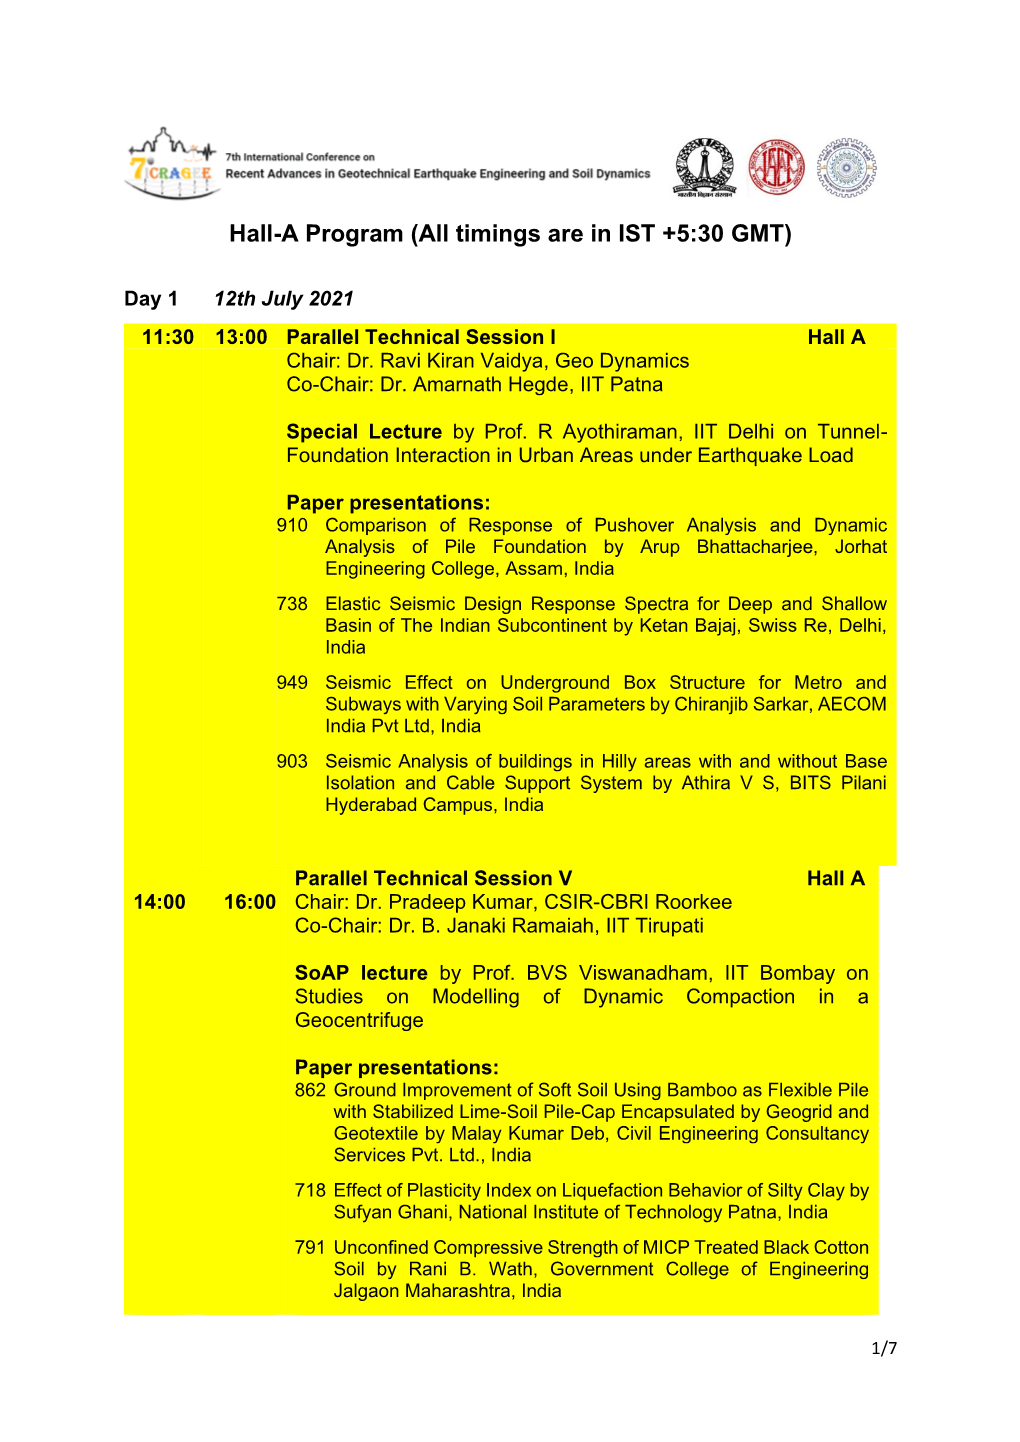 Hall-A Program (All Timings Are in IST +5:30 GMT)